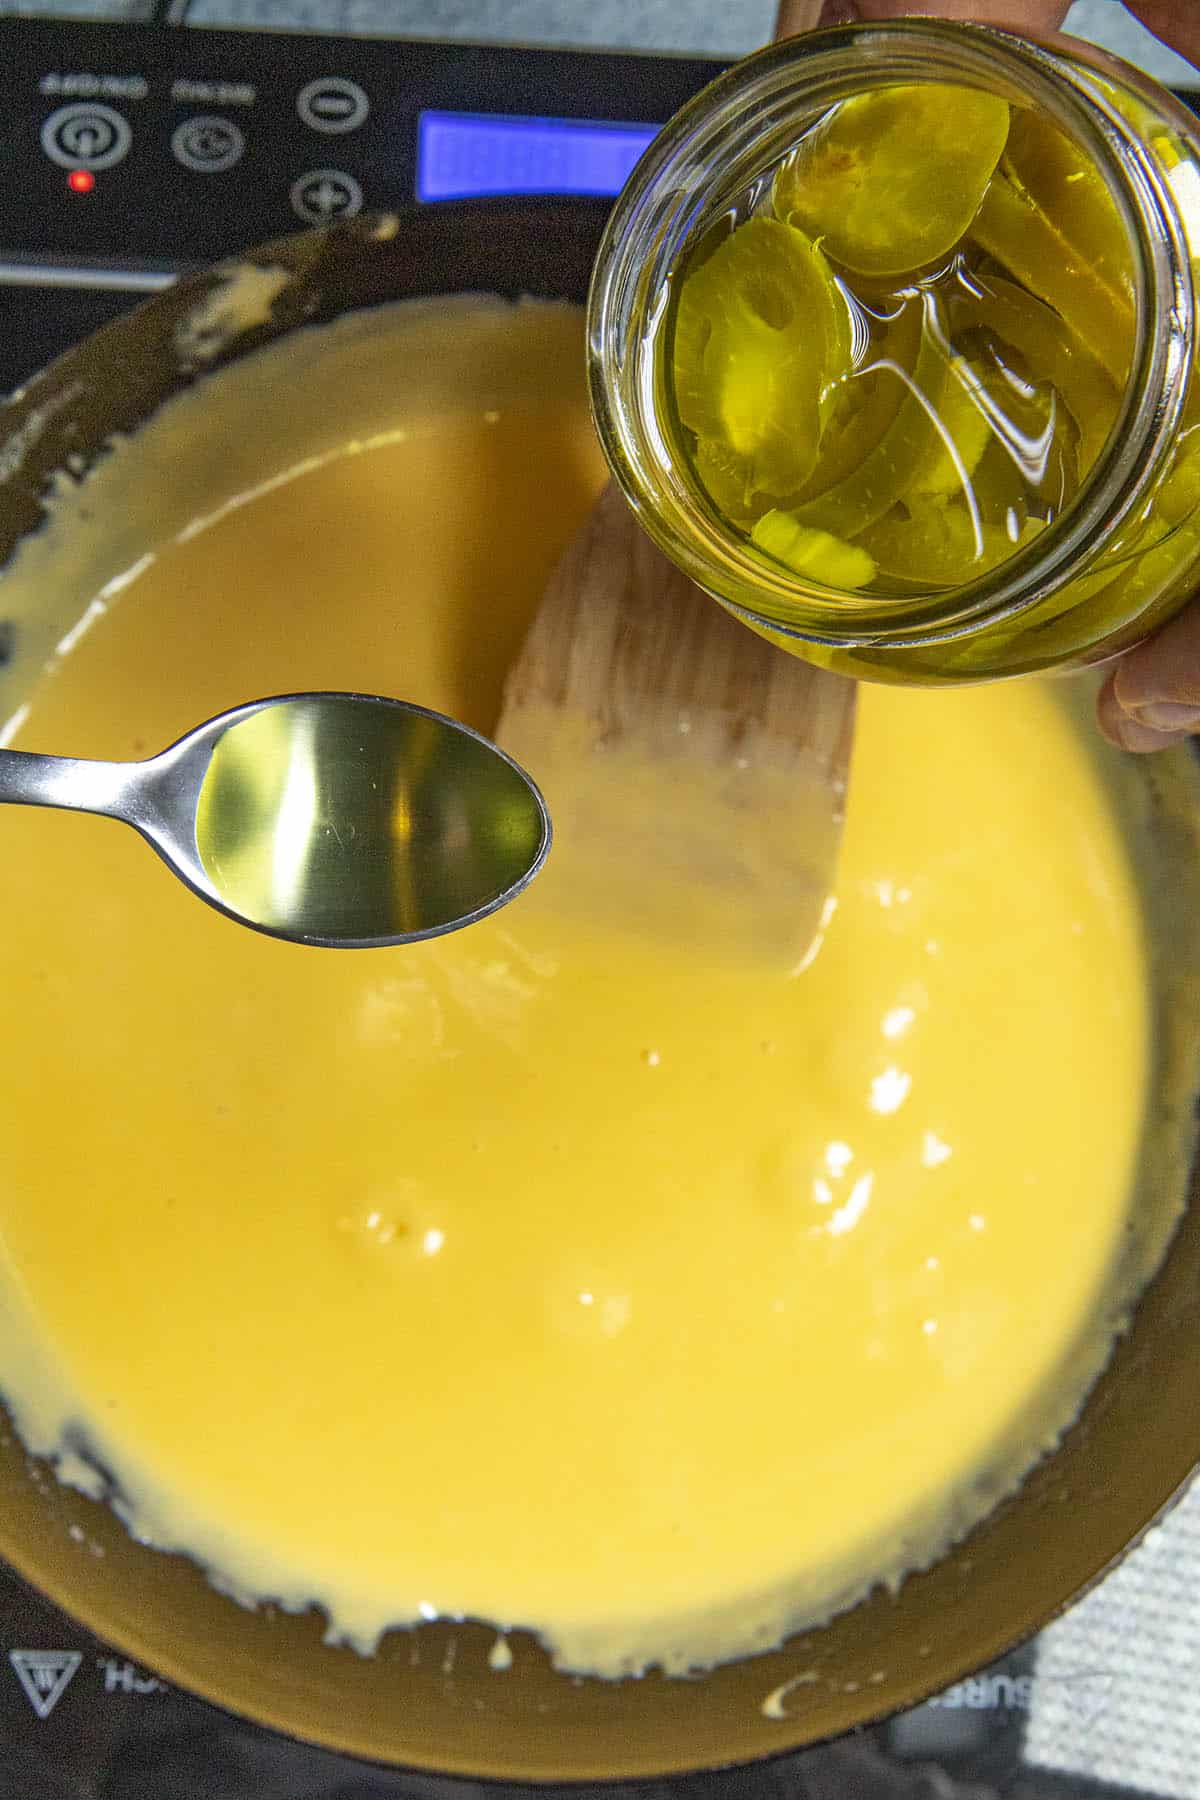 Adding jalapeno pickling juice to the homemade nacho cheese